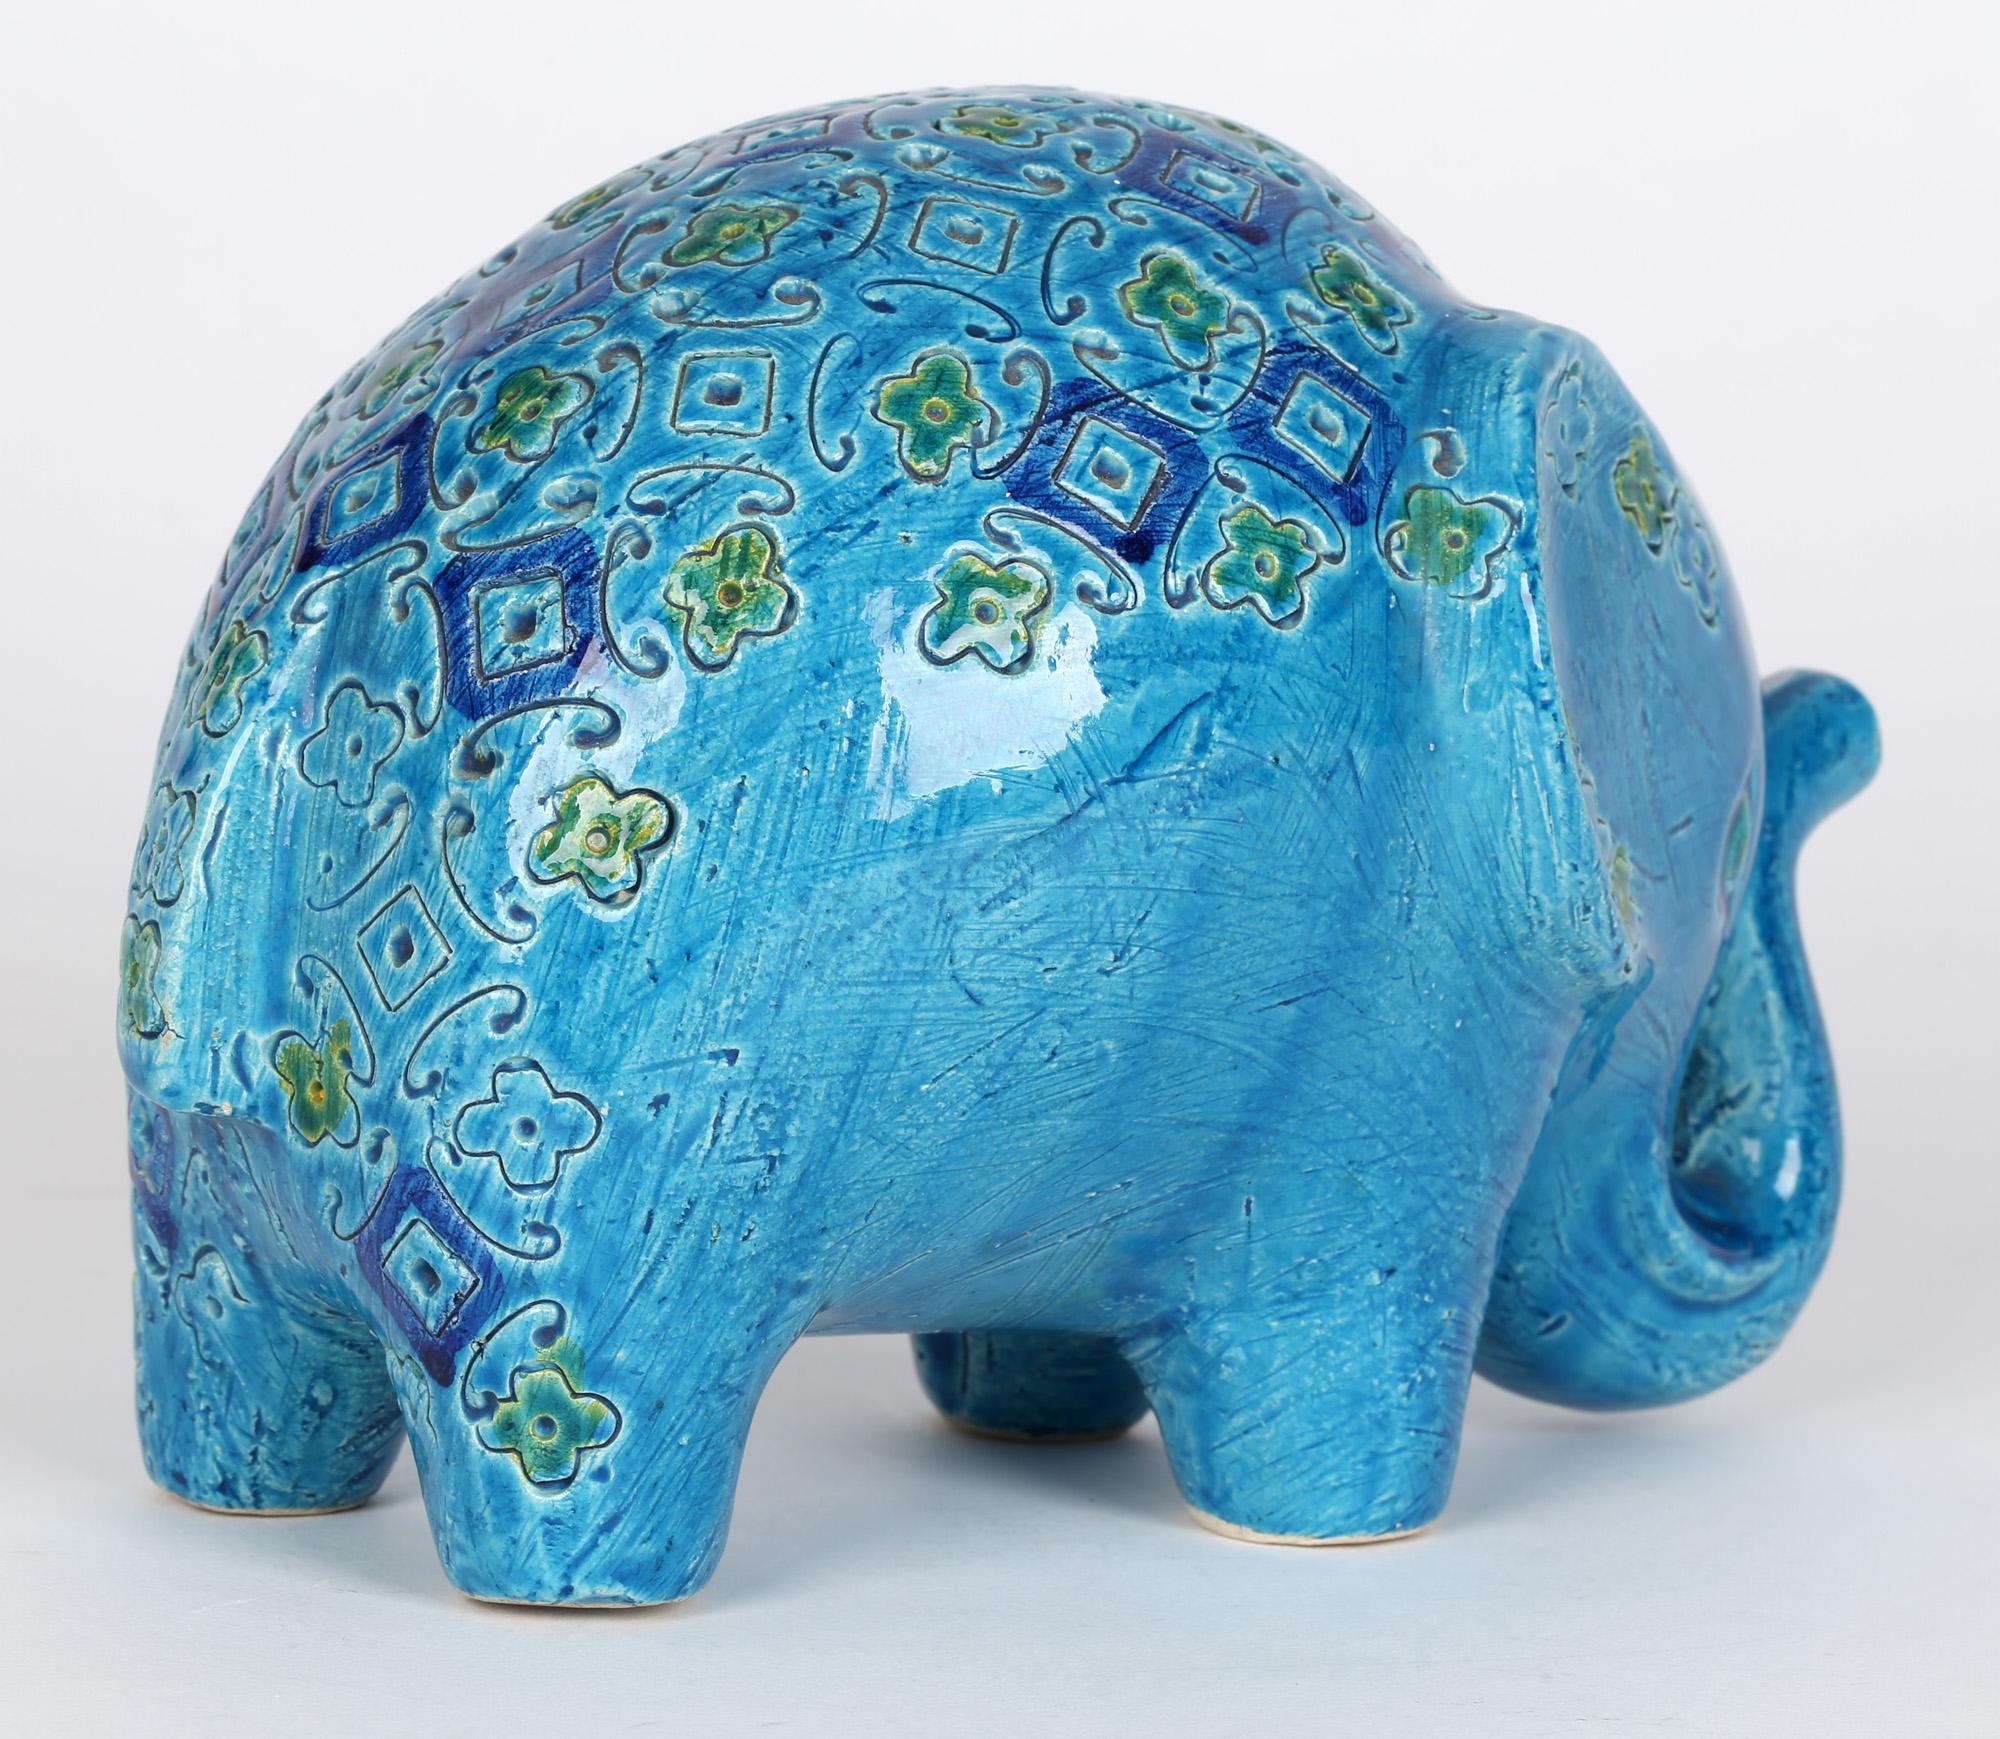 A stylish vintage Italian Bitossi Rimini Blu stylized pottery figure of an elephant designed by Aldo Londi and dating to the 1950's. This stylish hollow made standing figure is modeled in slightly abstract form and decorated in turquoise blue glazes